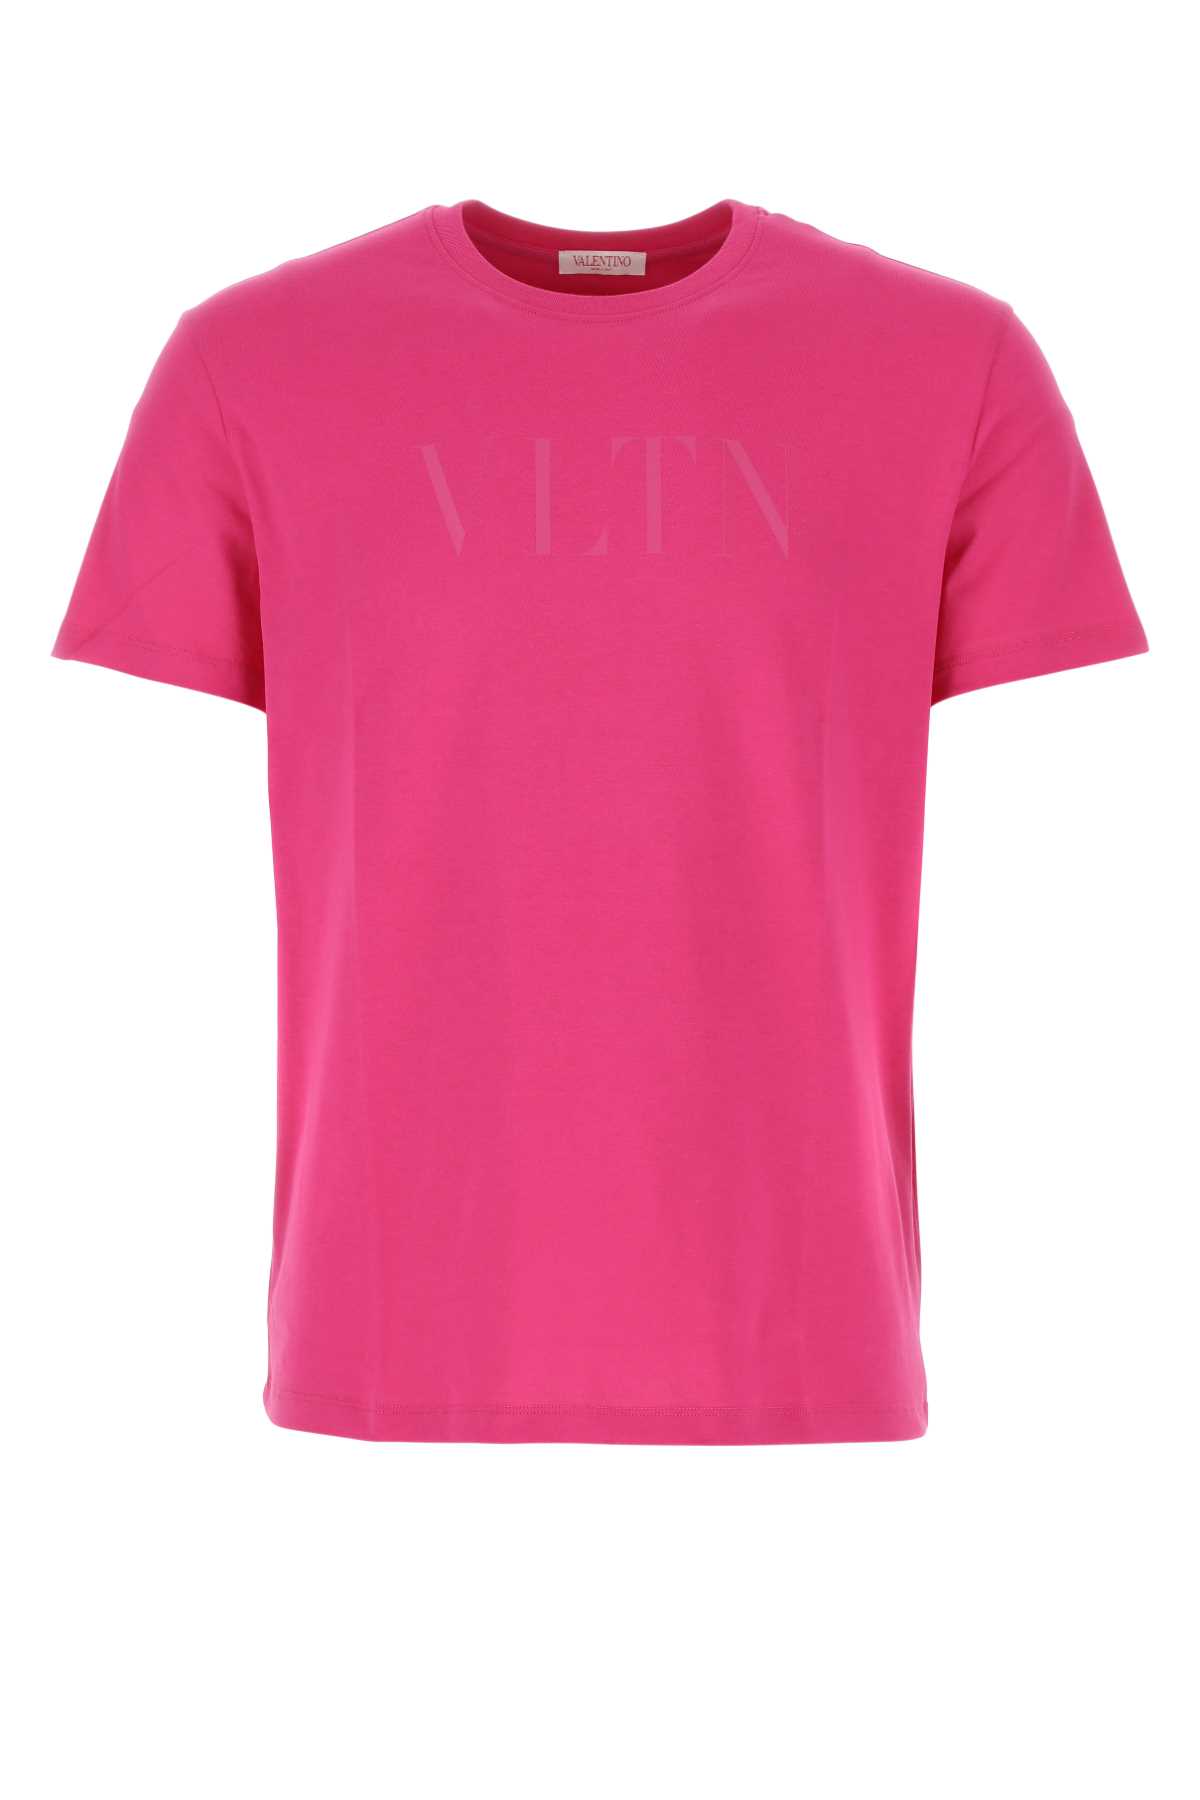 Valentino Pp Pink Cotton T-shirt In Pinkpp